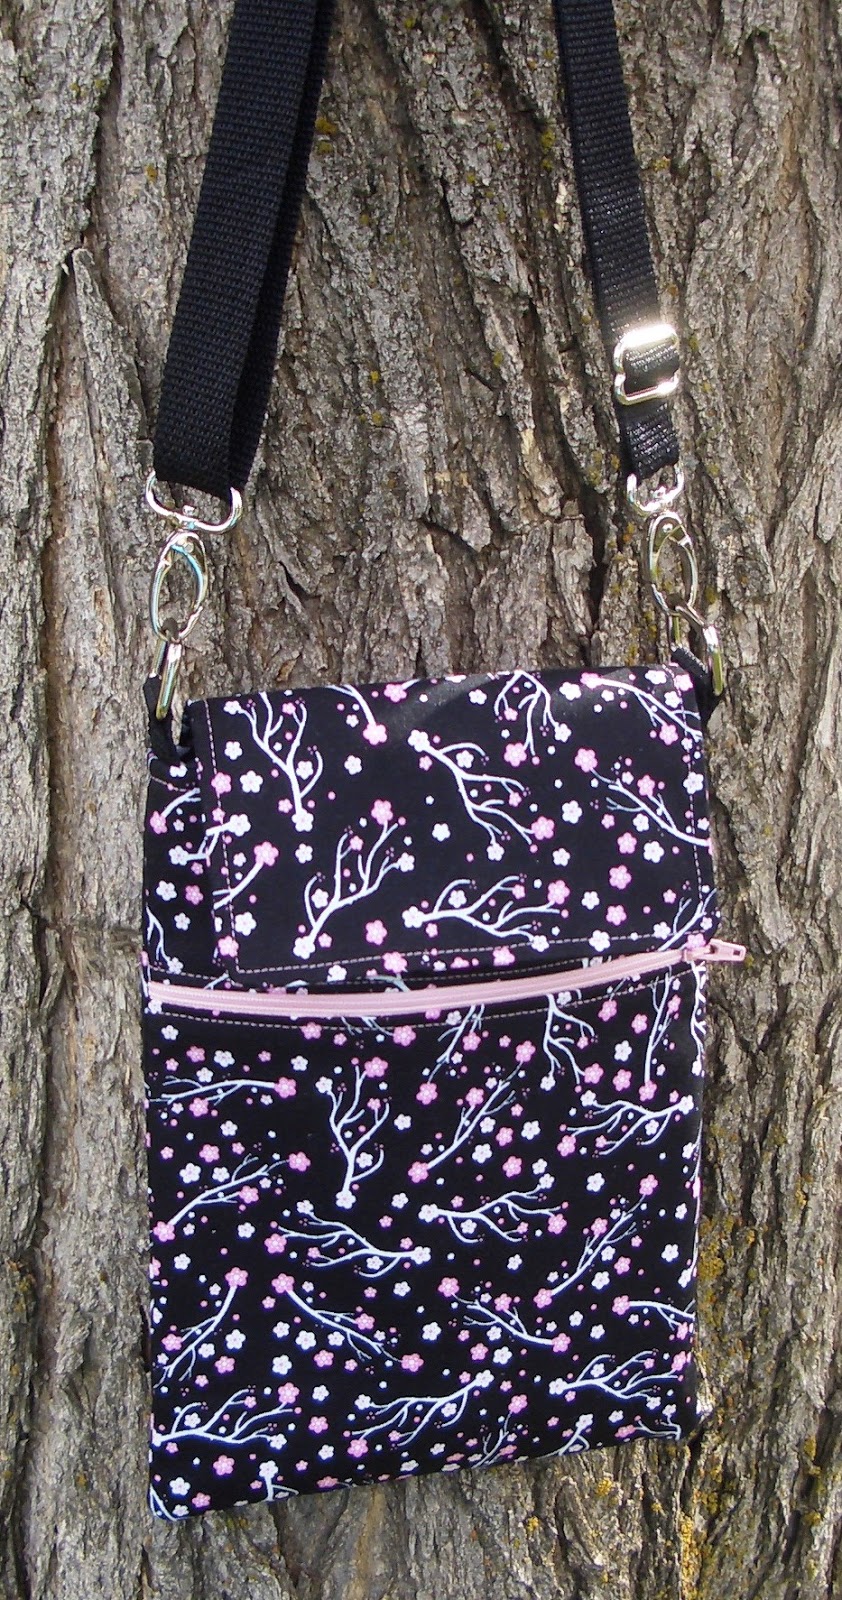 The Fabric Bakery: Easy Cross body Purse Handbag Tutorial with Adjustable Strap and Zipper